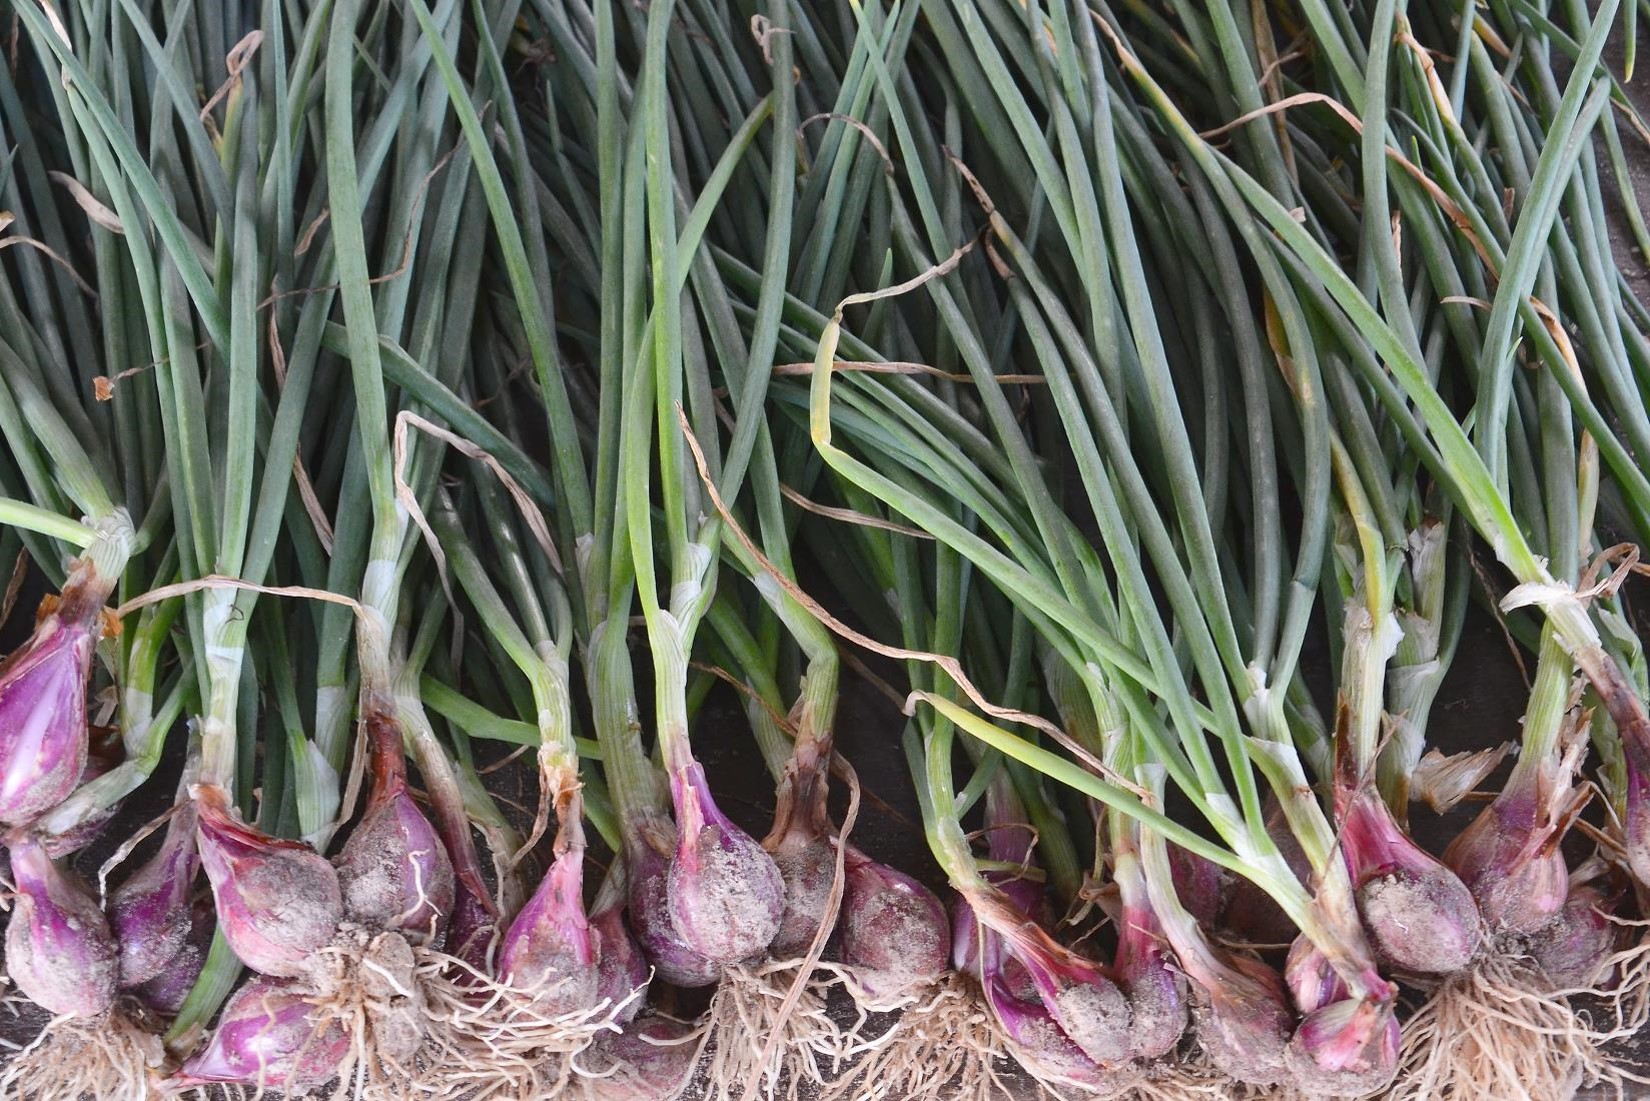 FIND OUT MORE ABOUT SHALLOT